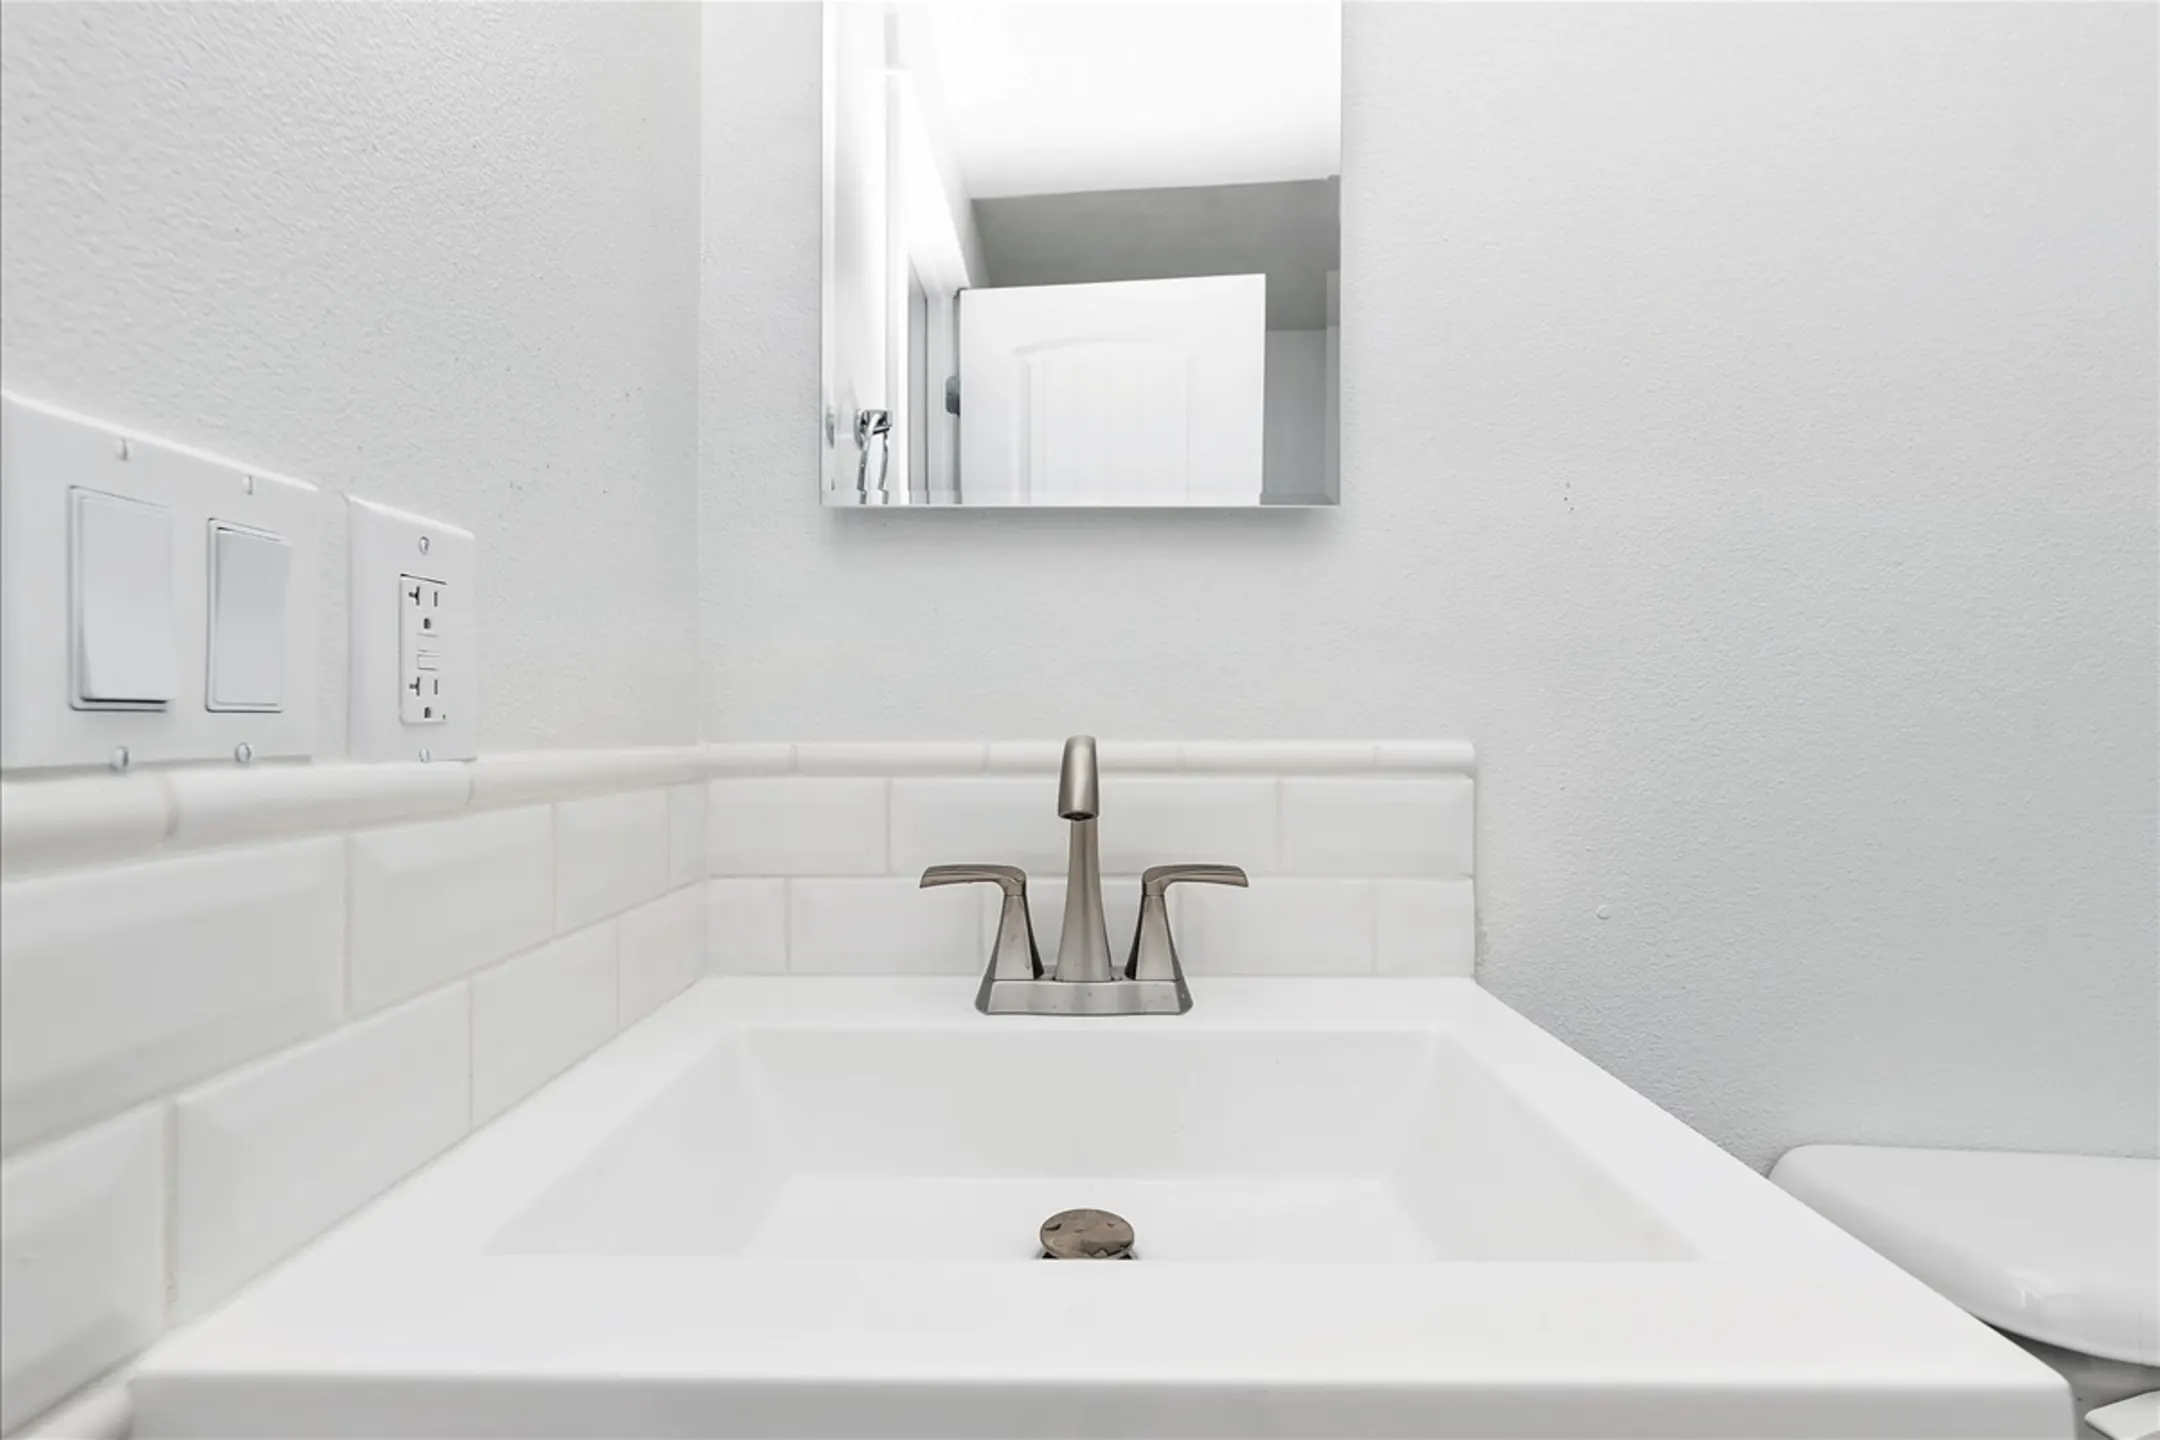 Bathroom - Bowery Point Townhomes - Boise, ID